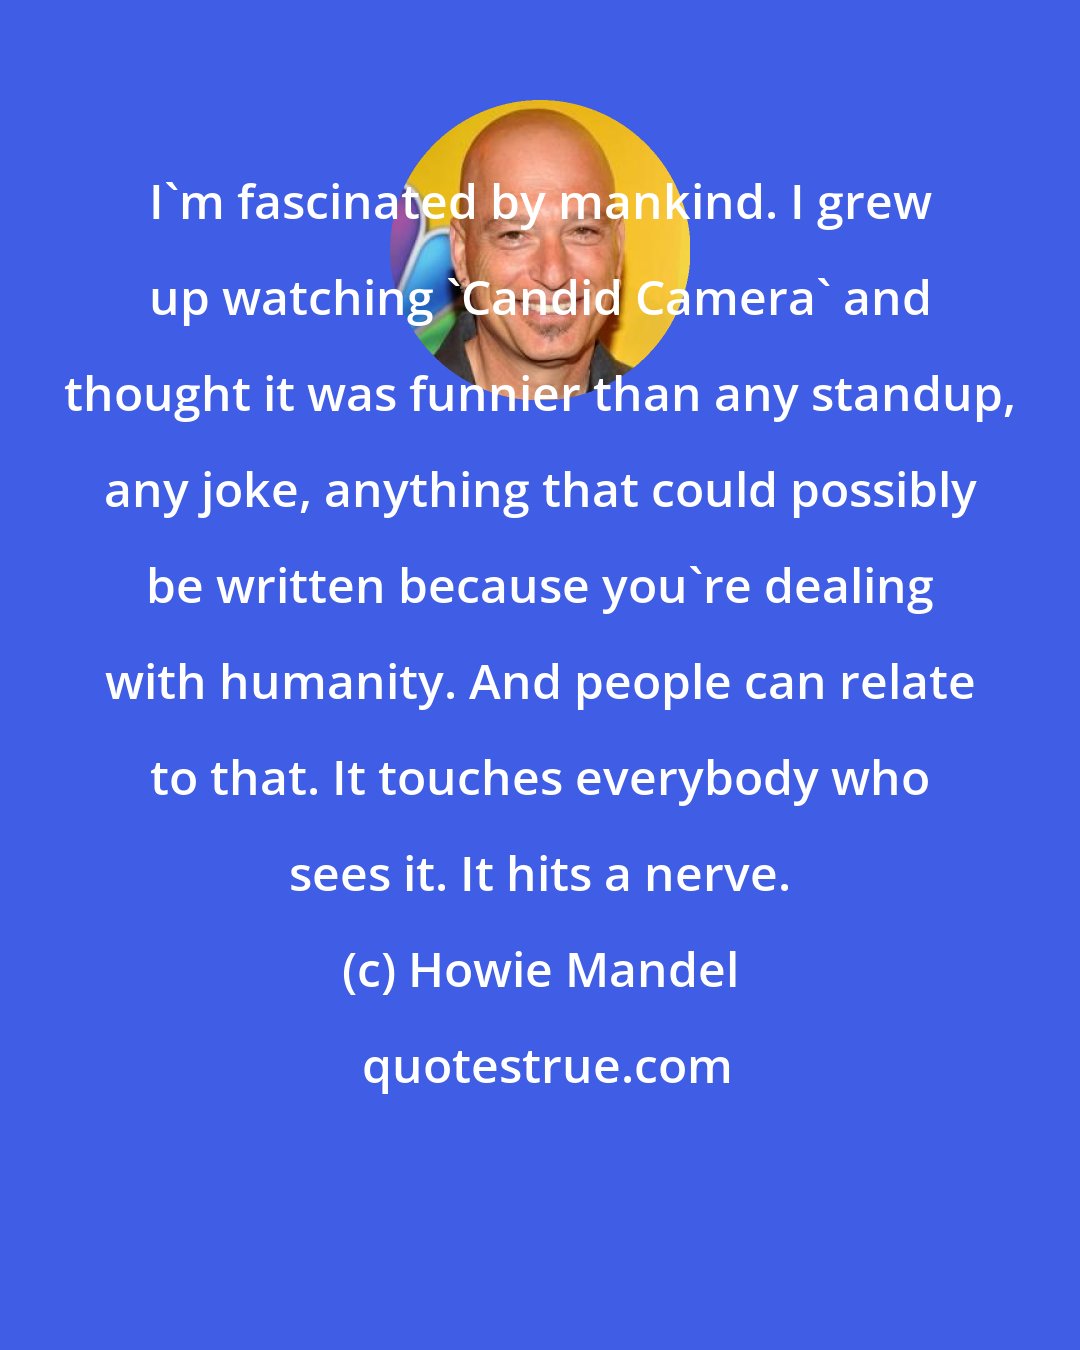 Howie Mandel: I'm fascinated by mankind. I grew up watching 'Candid Camera' and thought it was funnier than any standup, any joke, anything that could possibly be written because you're dealing with humanity. And people can relate to that. It touches everybody who sees it. It hits a nerve.